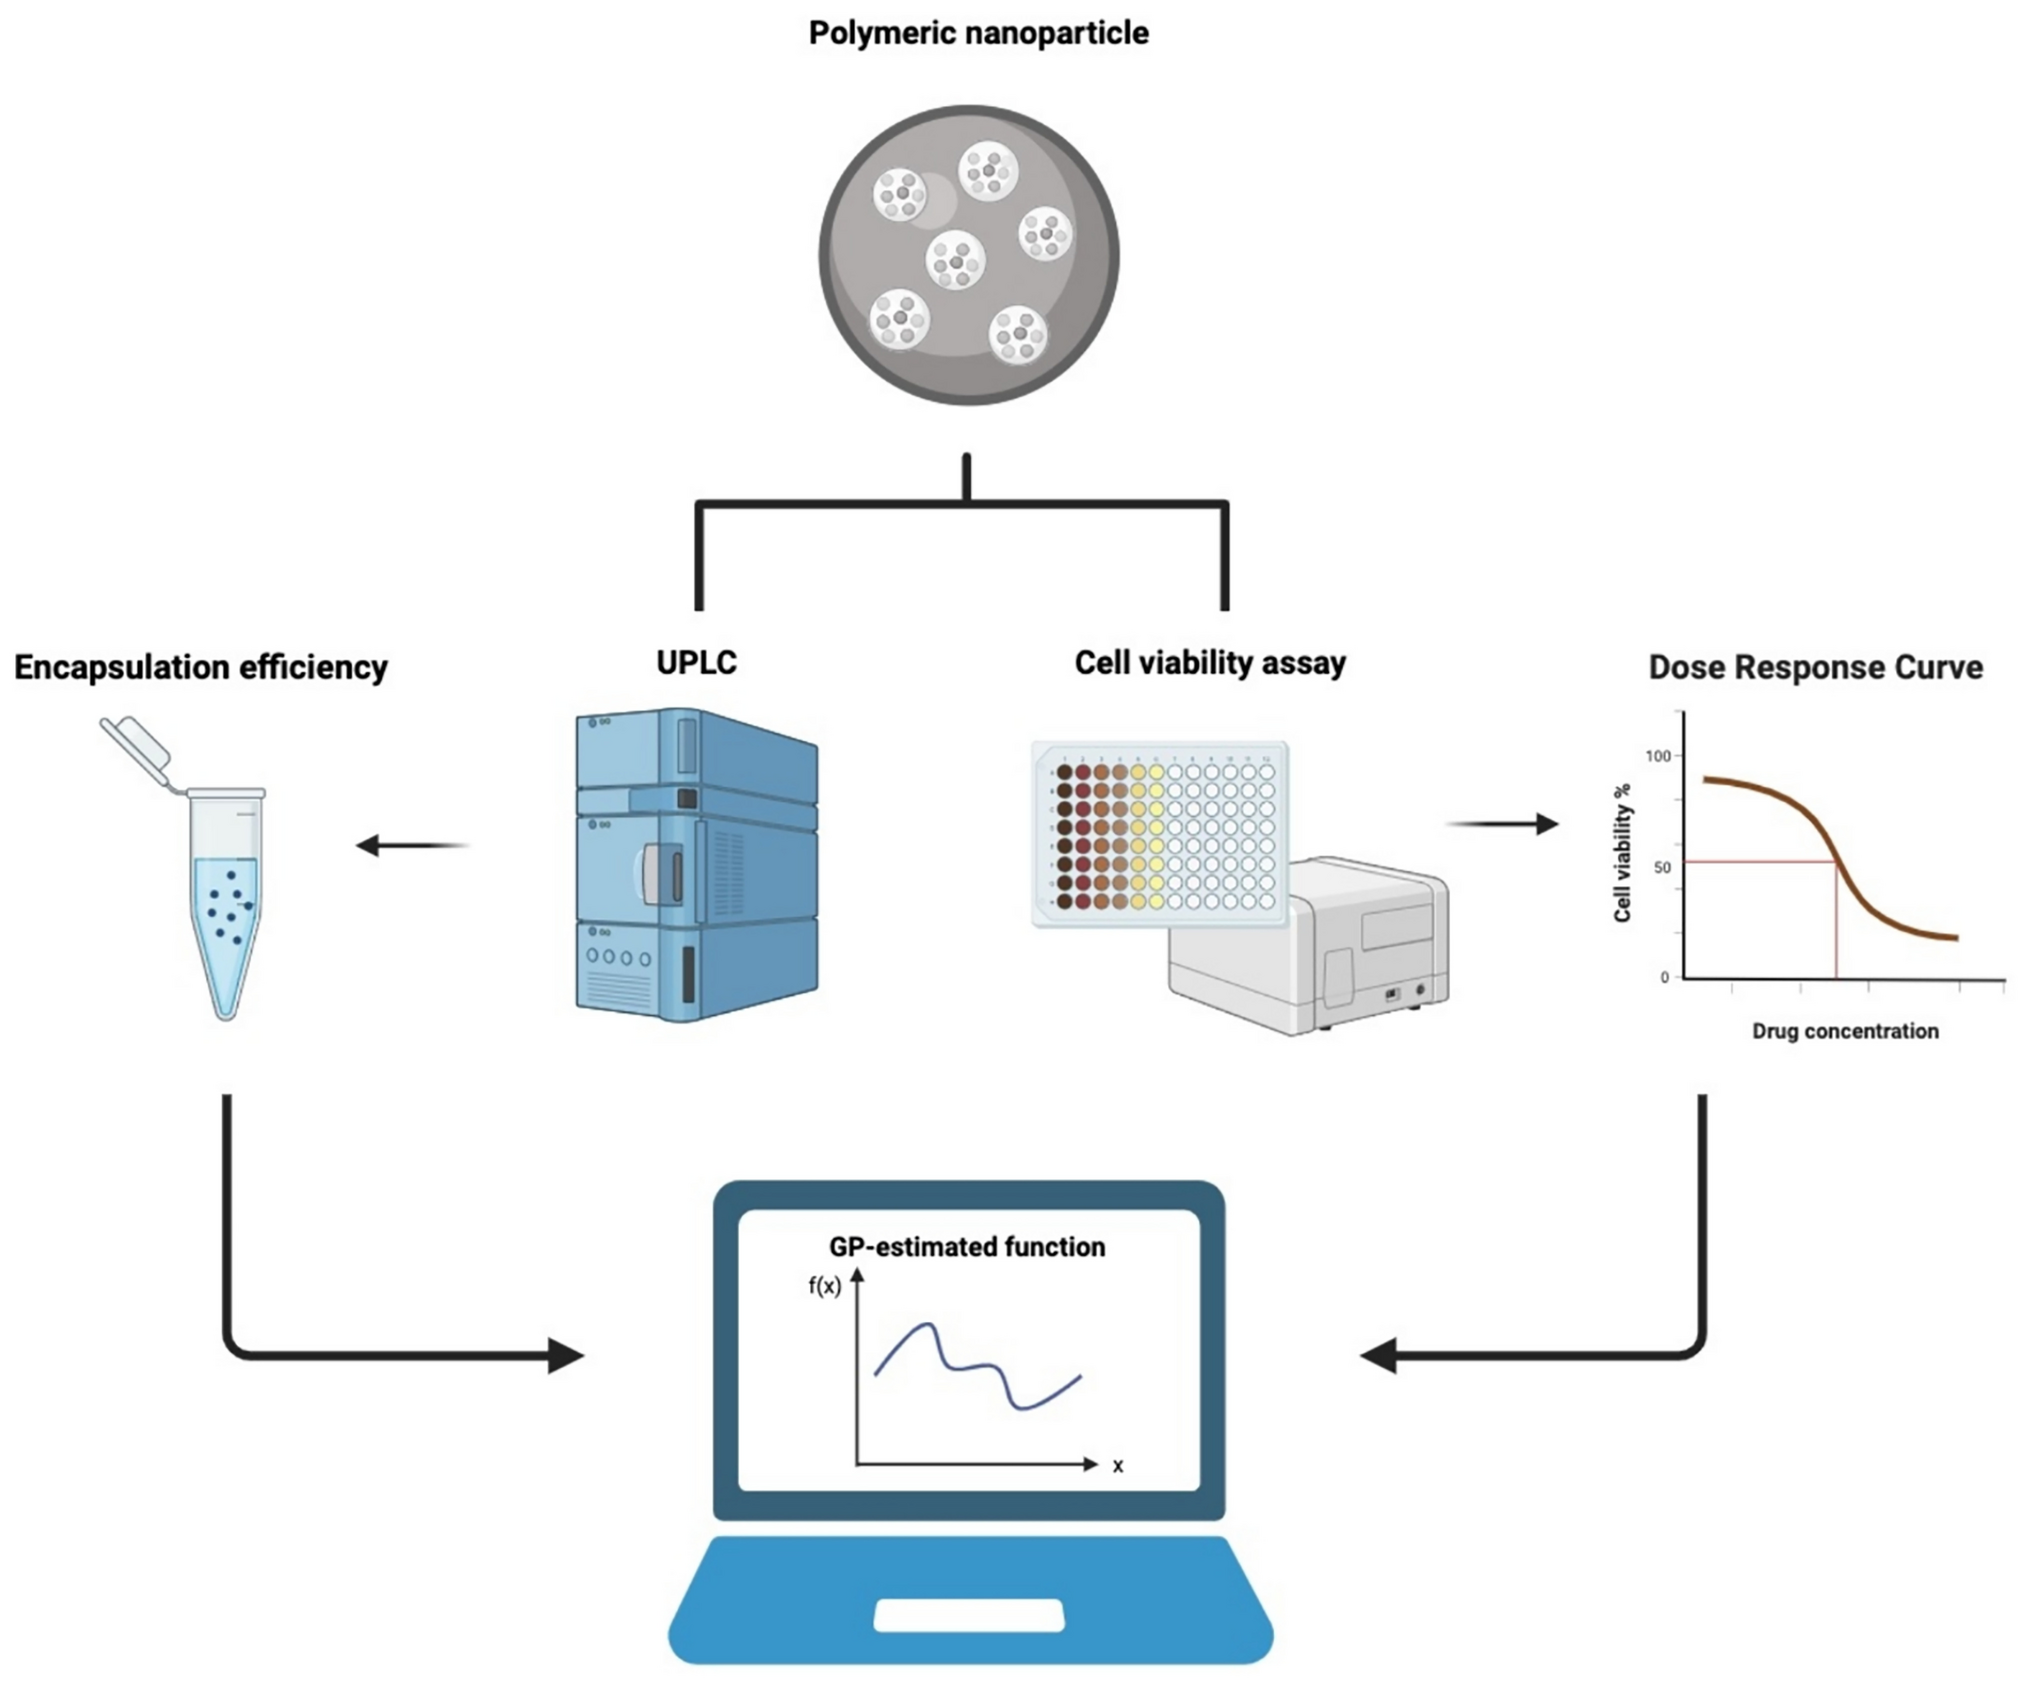 Gaussian processes modeling for the prediction of polymeric nanoparticle formulation design to enhance encapsulation efficiency and therapeutic efficacy